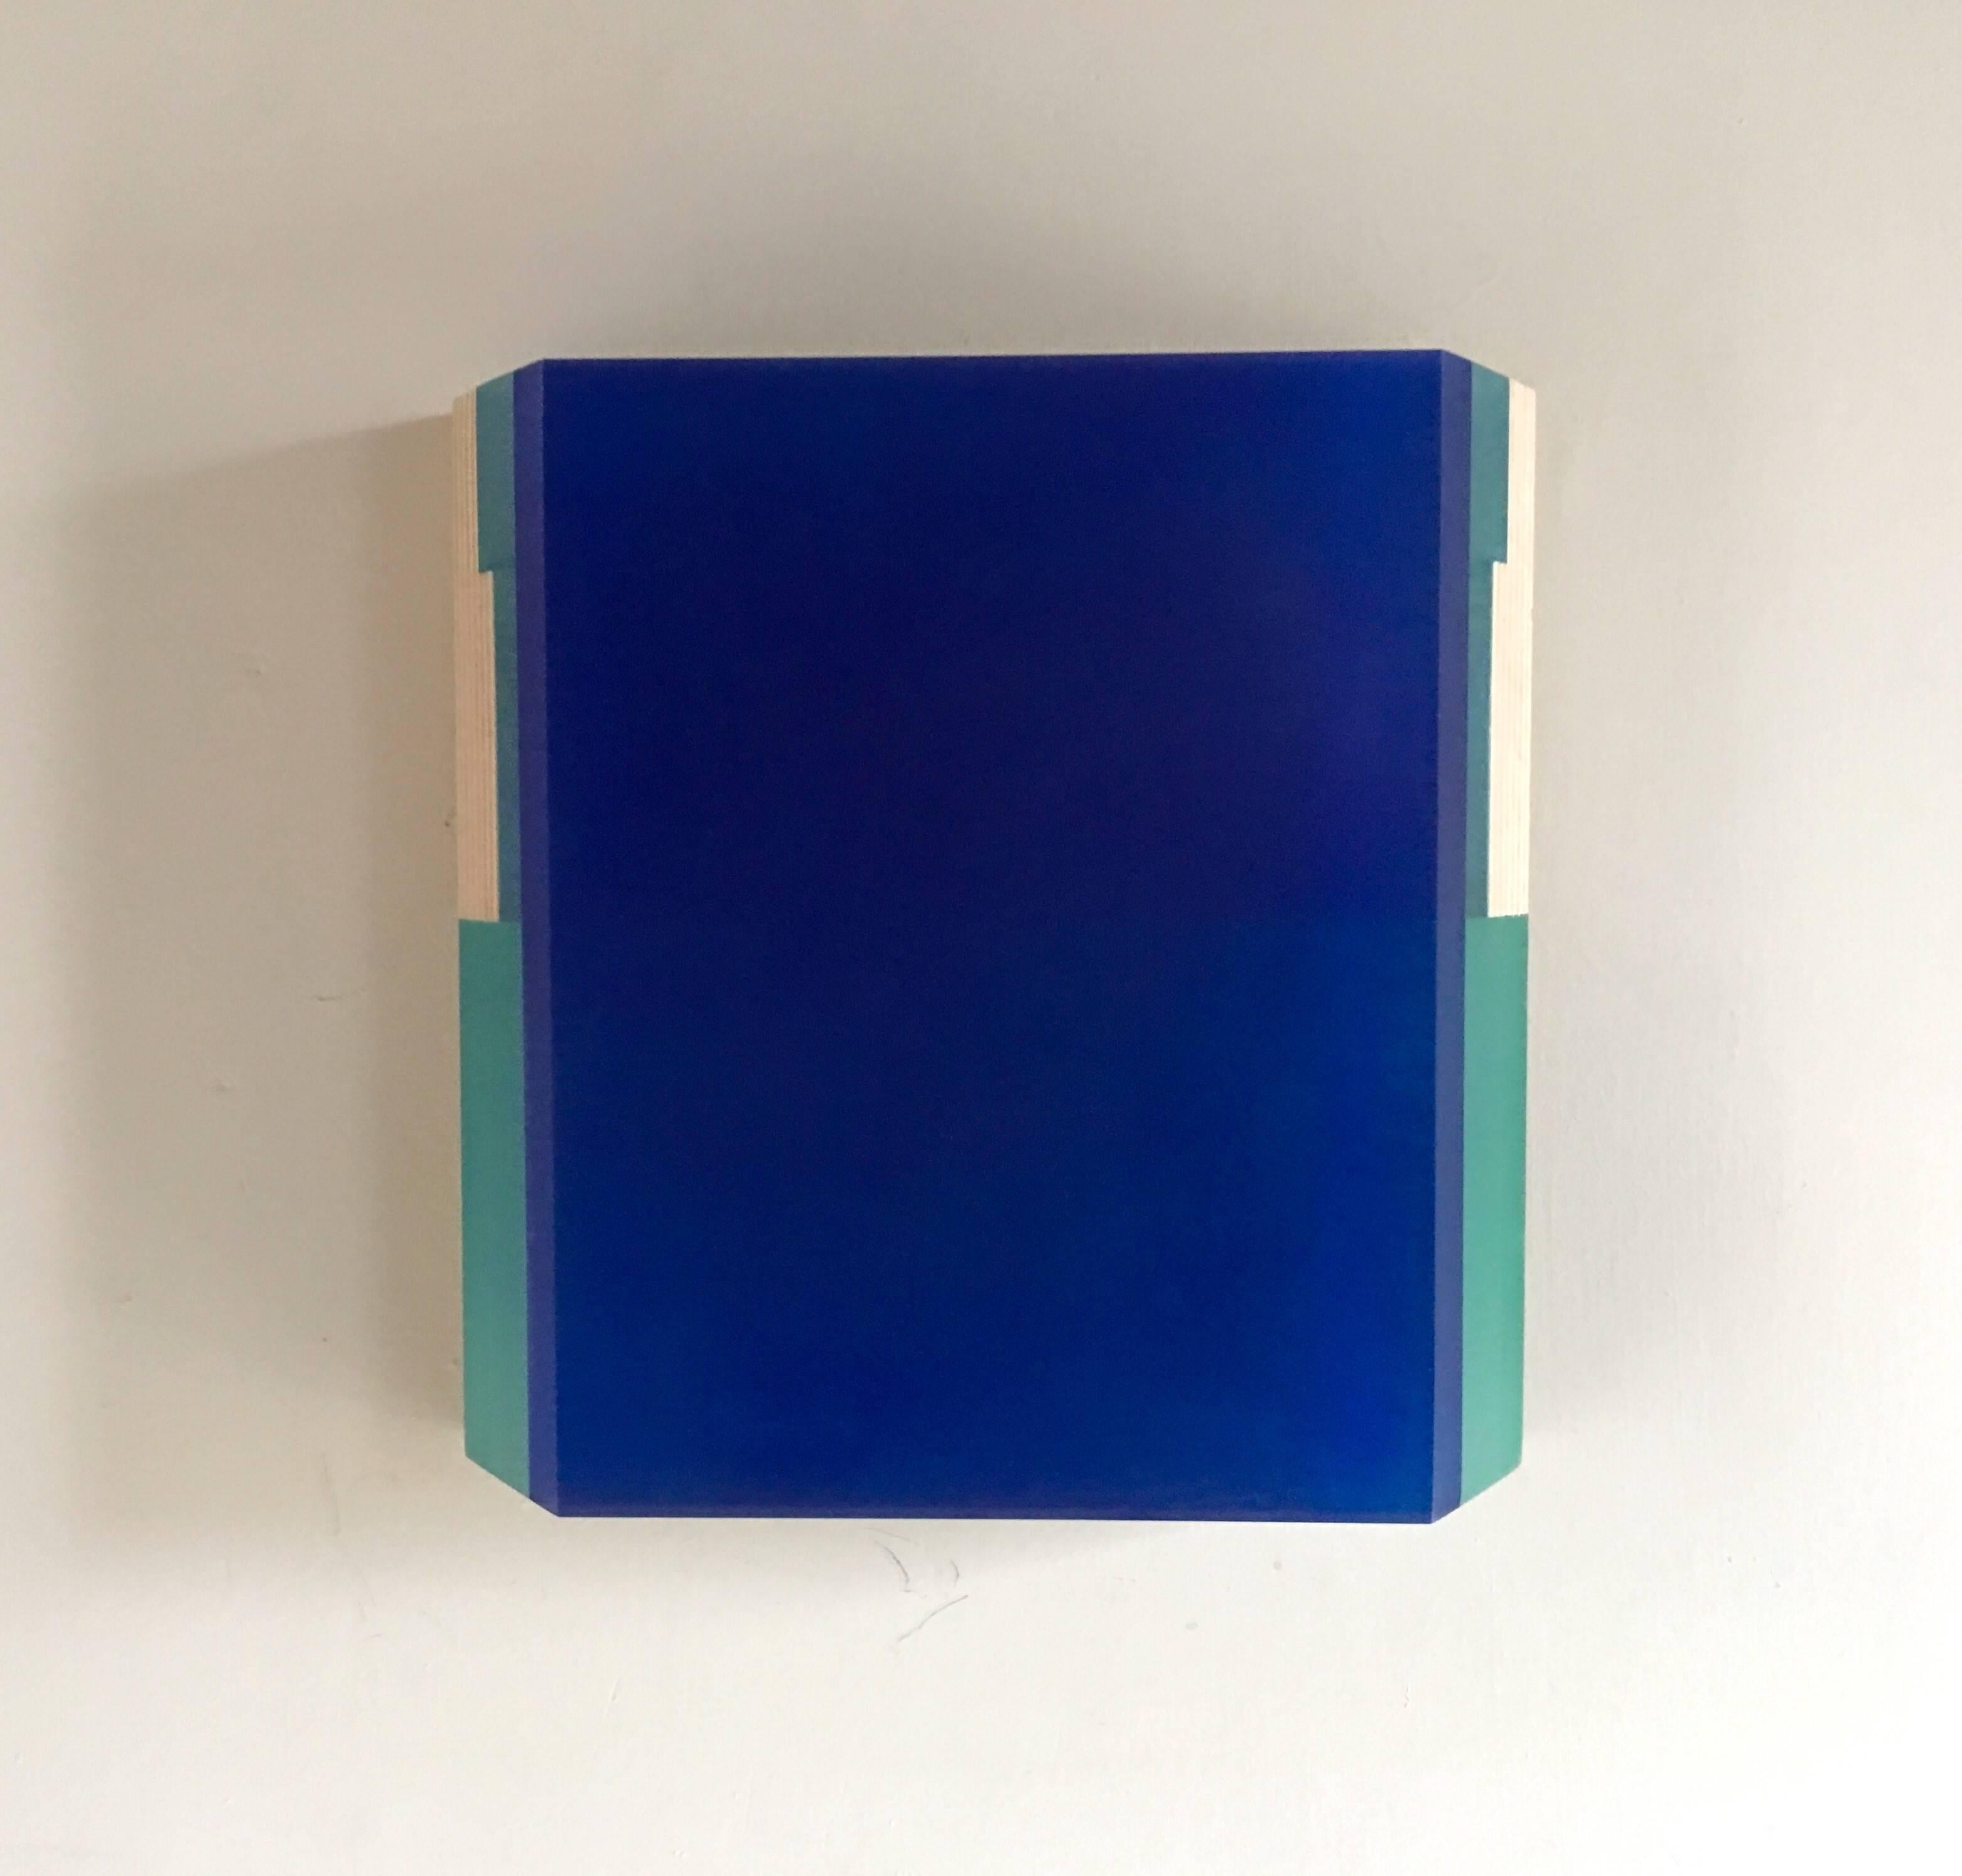 Michelle Benoit Abstract Sculpture - Untitled Blue 1- abstract geometric translucent wall sculpture